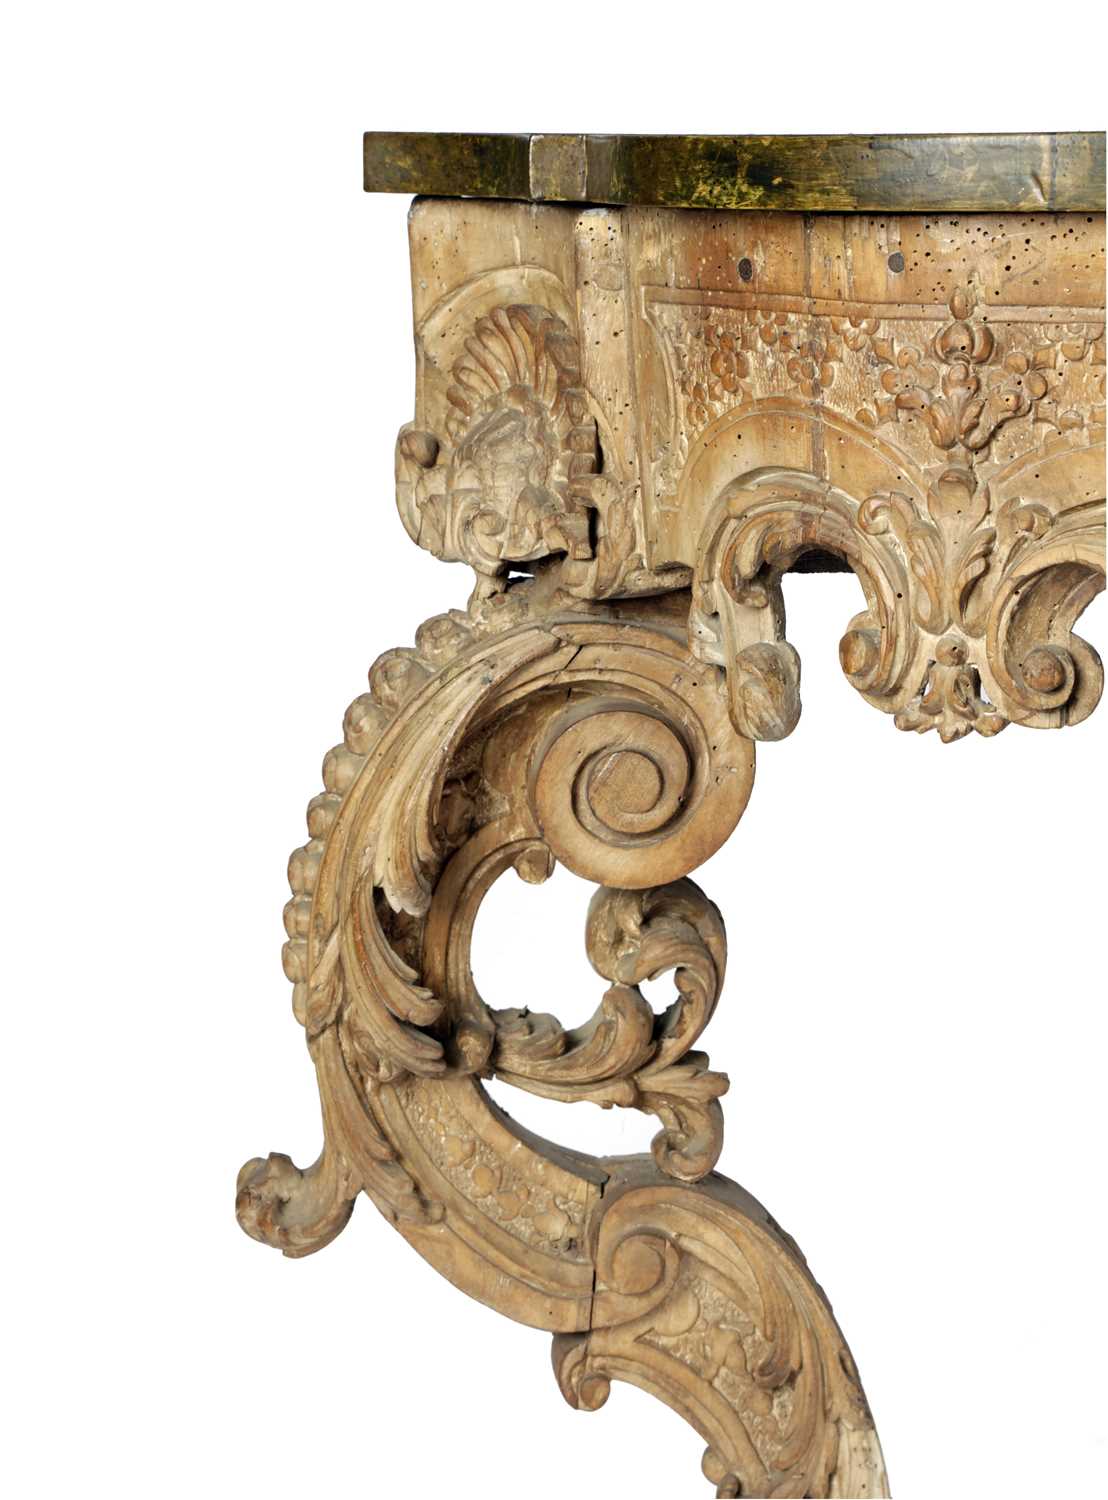 A ROCOCO CARVED WALNUT CONSOLE TABLE POSSIBLY GERMAN OR ITALIAN, 18TH CENTURY AND LATER the later - Image 2 of 6